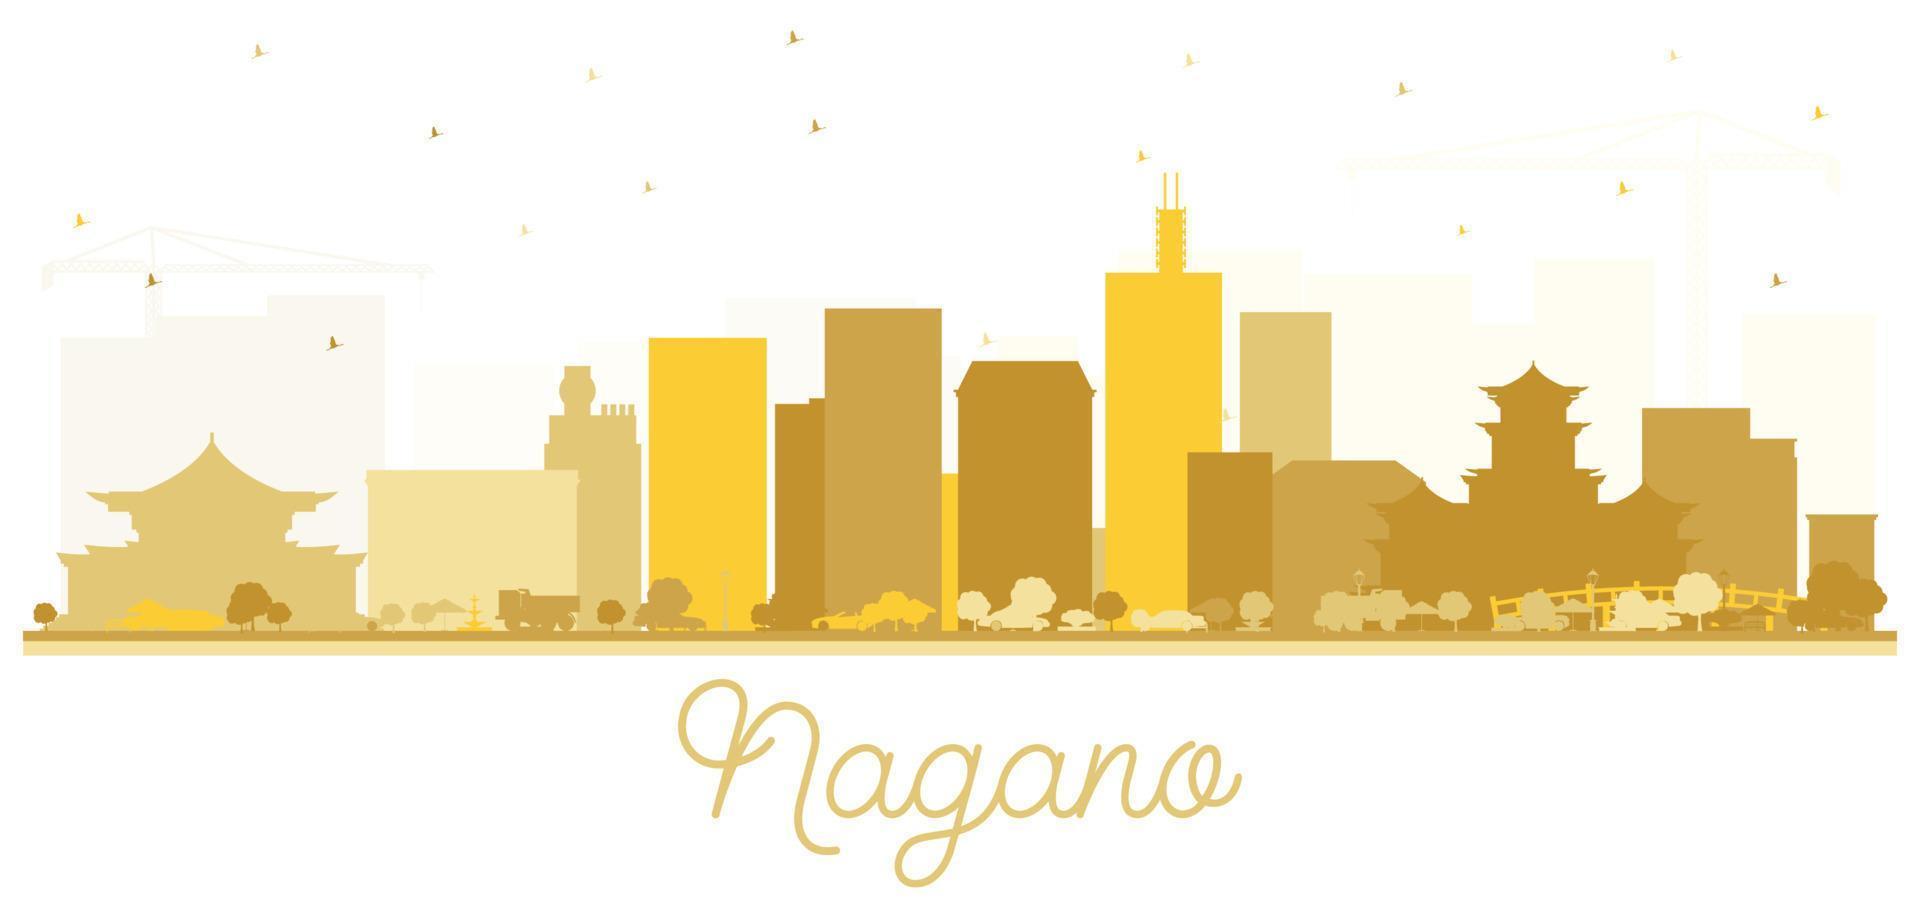 Nagano Japan City Skyline Silhouette with Golden Buildings. vector